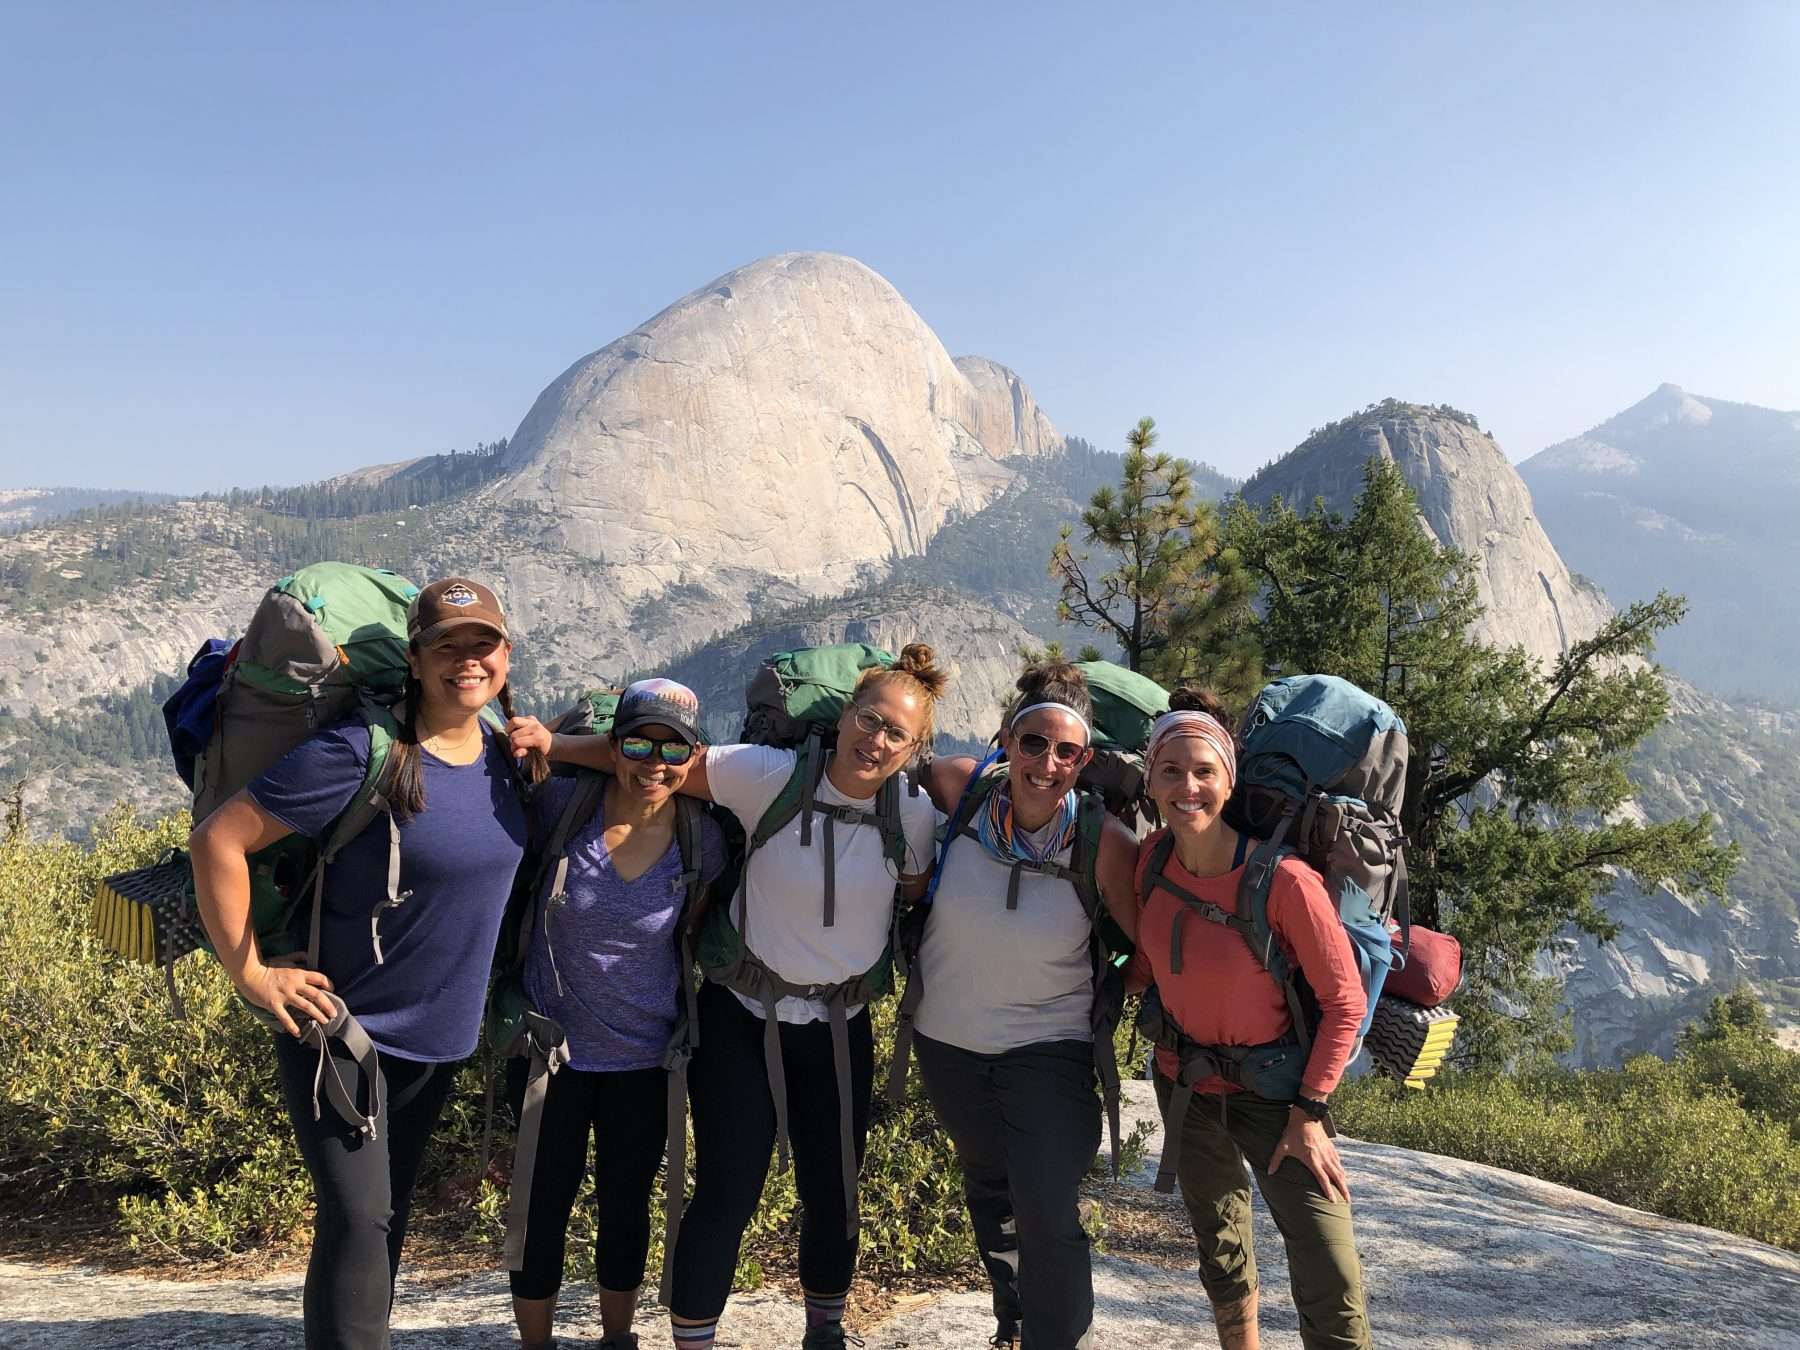 Women posing in front of Half Dome wearing backpacks during a hike